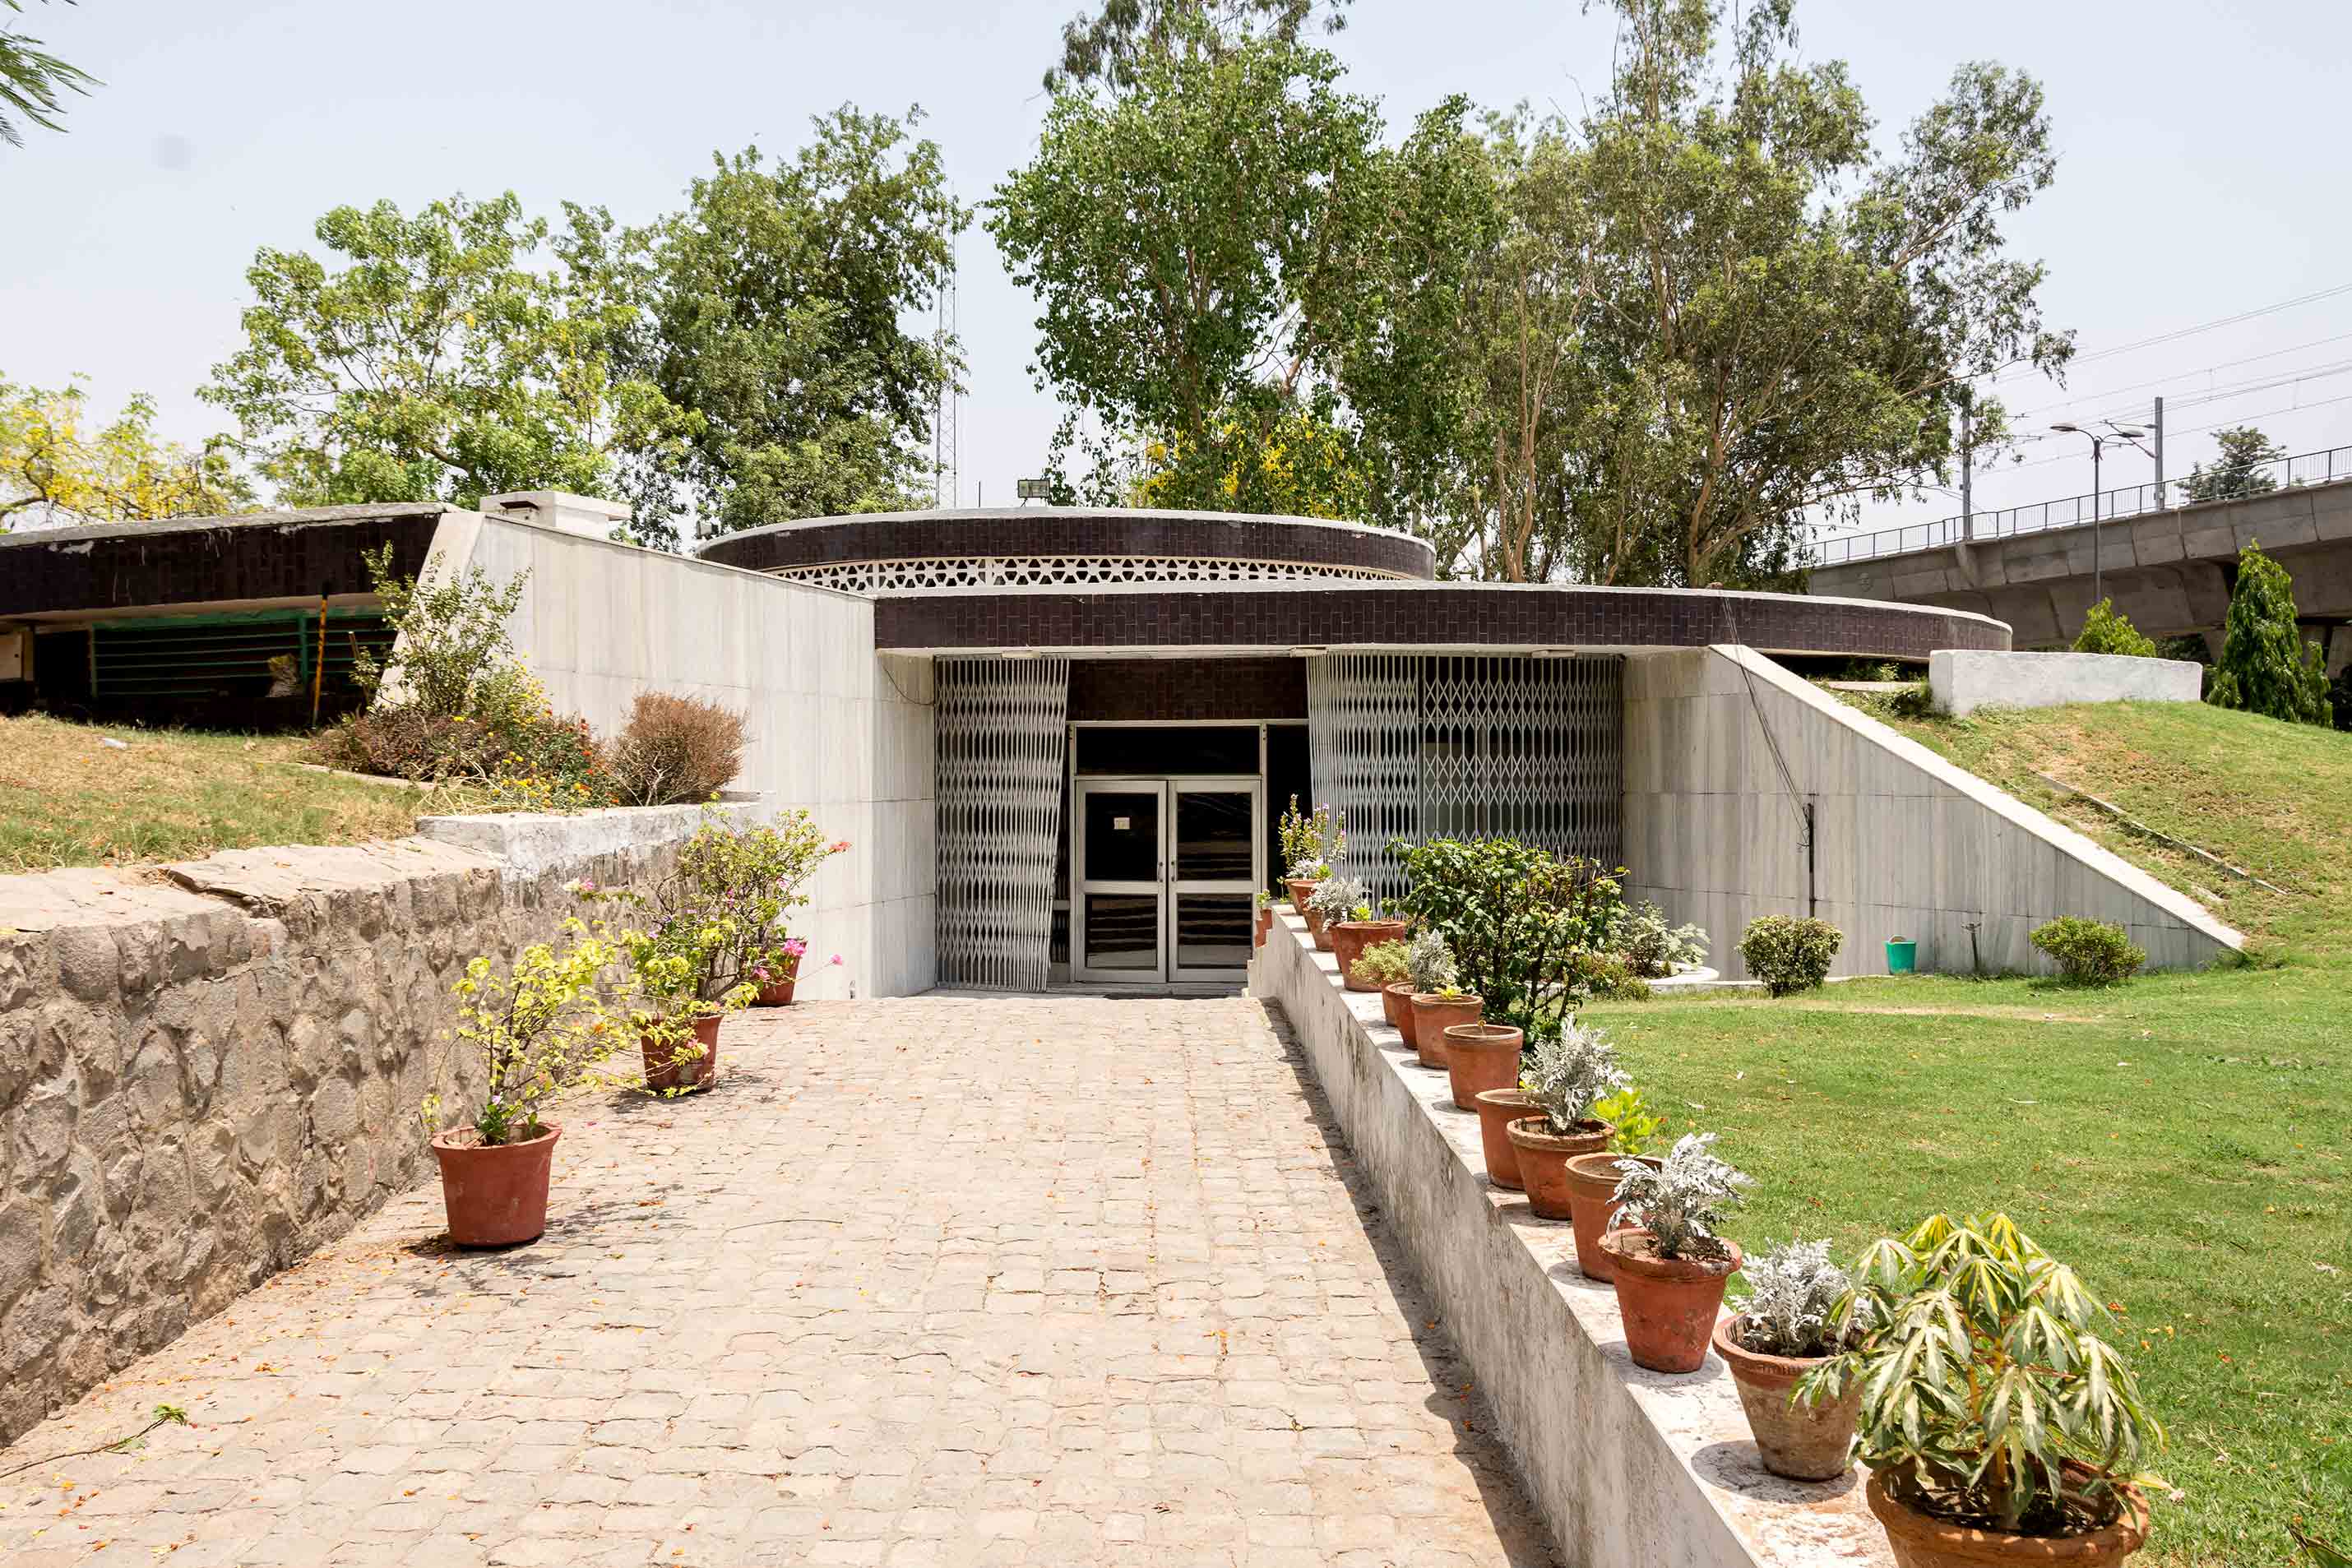 Entrance of the Zakir Hussain Museum